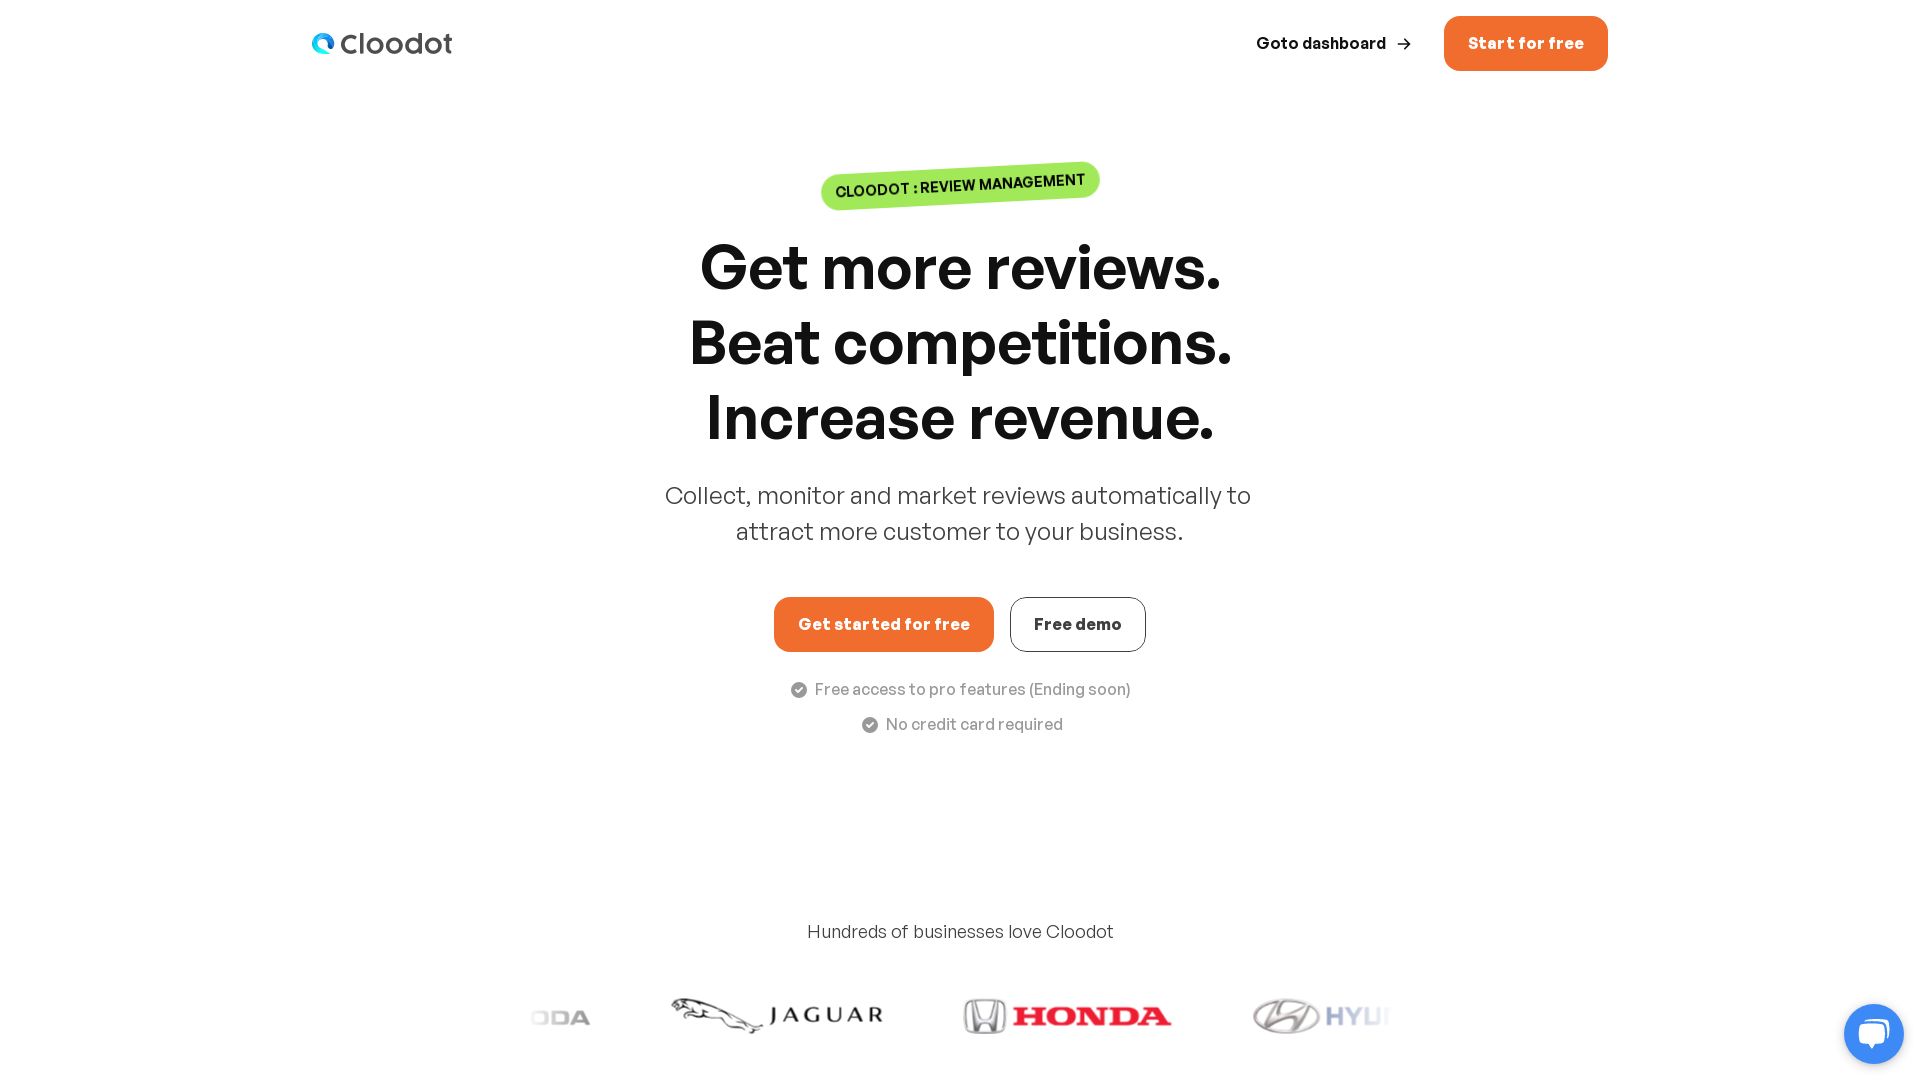 The best reputation marketing software for businesses | Cloodot